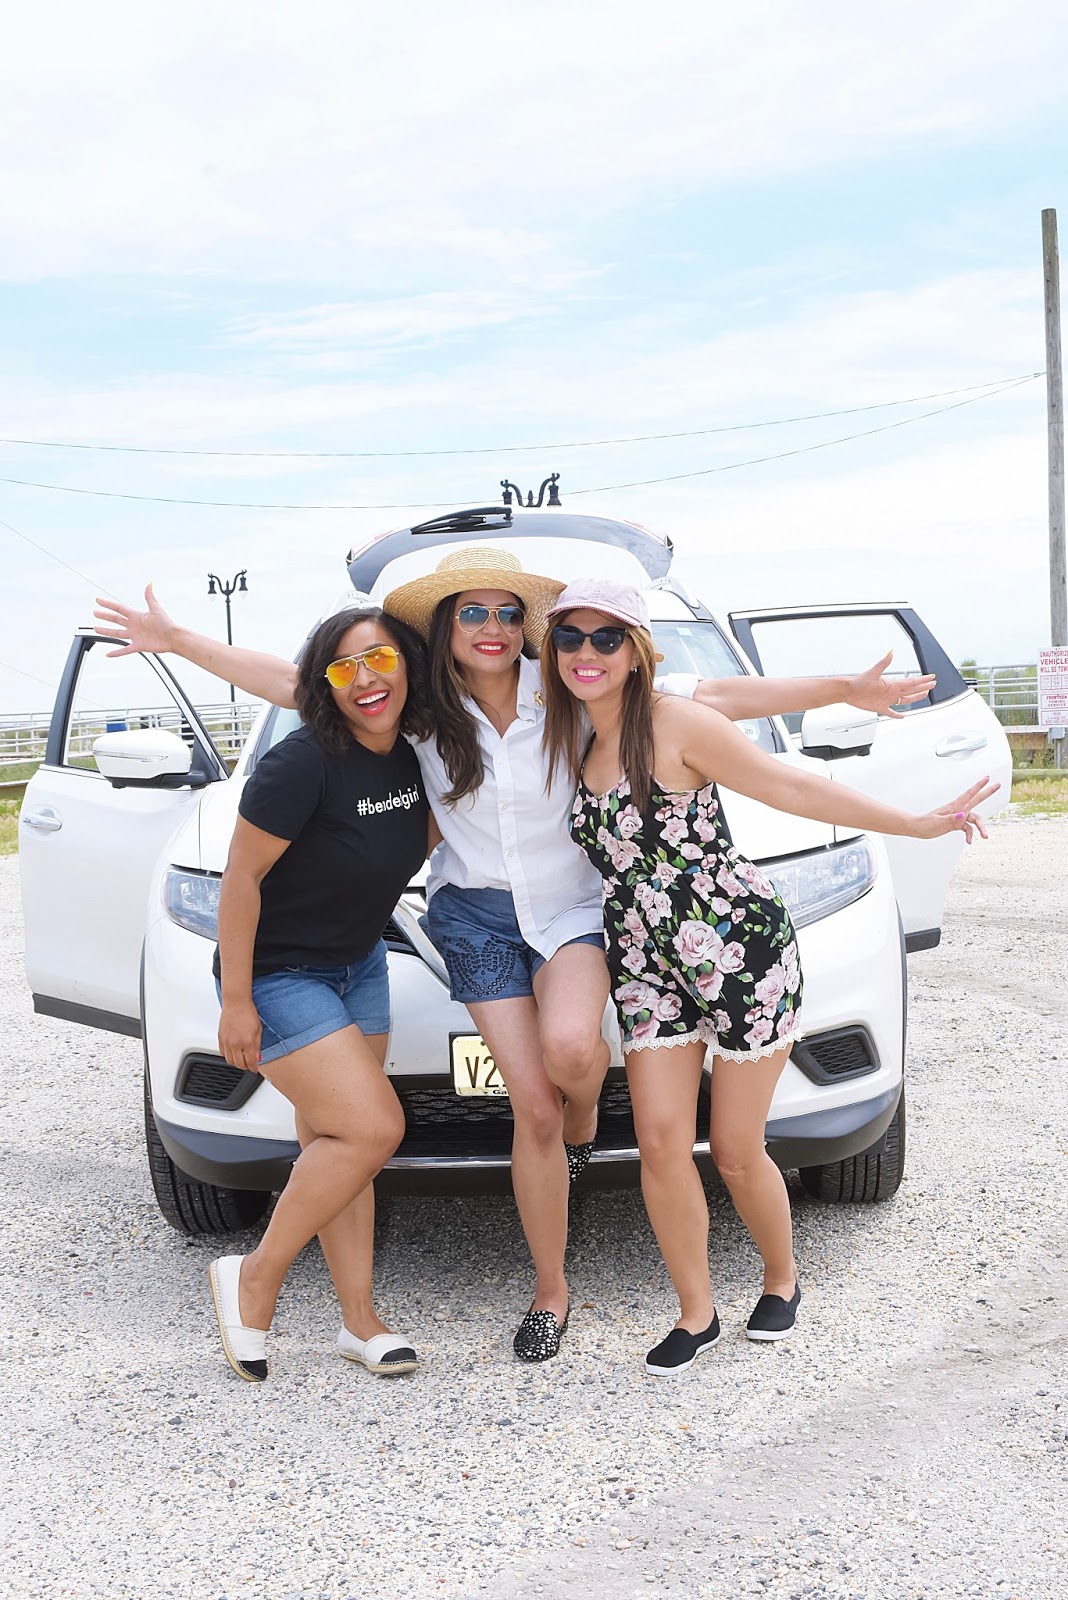 Lets Hit The Road! Essentials For Your Next Girls Road Trip, girls getaway, road trip, travel, travel blog, trip advisor, travel bloggers, luggage, nissan, suv, nissan rouge